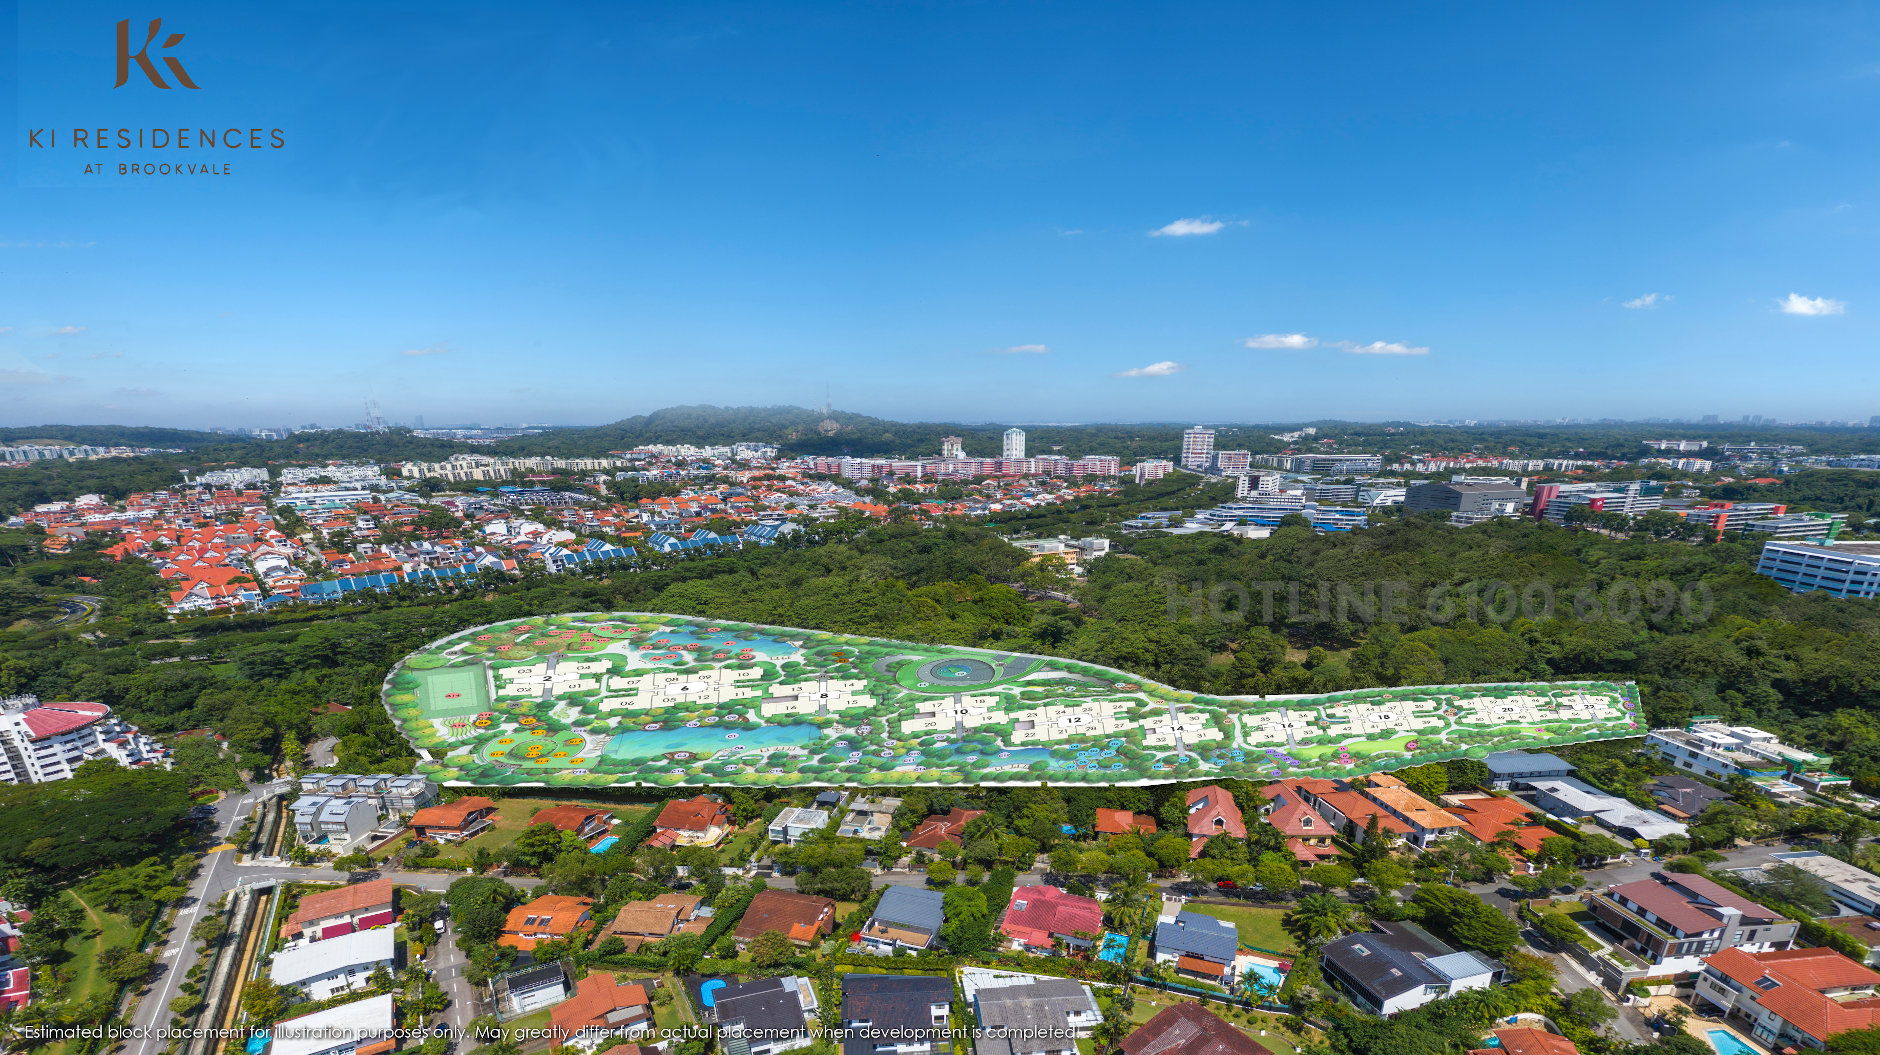 Ki Residences Site Layout . Aerial Drone View from South Looking North